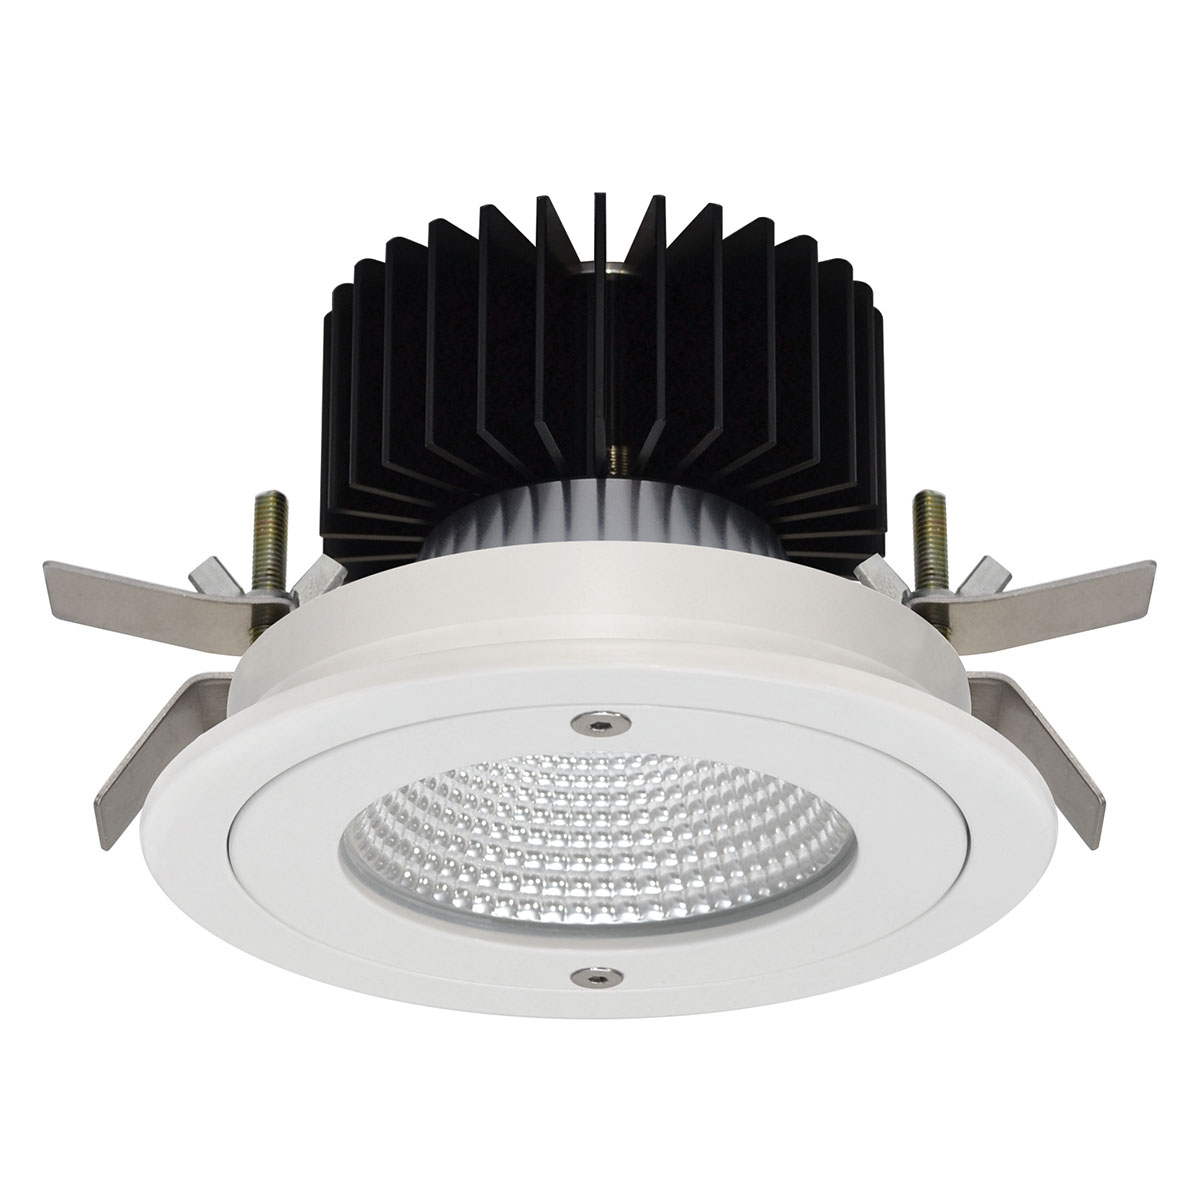 Kopa 10W Anti Tamper Fixed Round Recessed Downlight IP65 Rated 25° Degree Reflector White